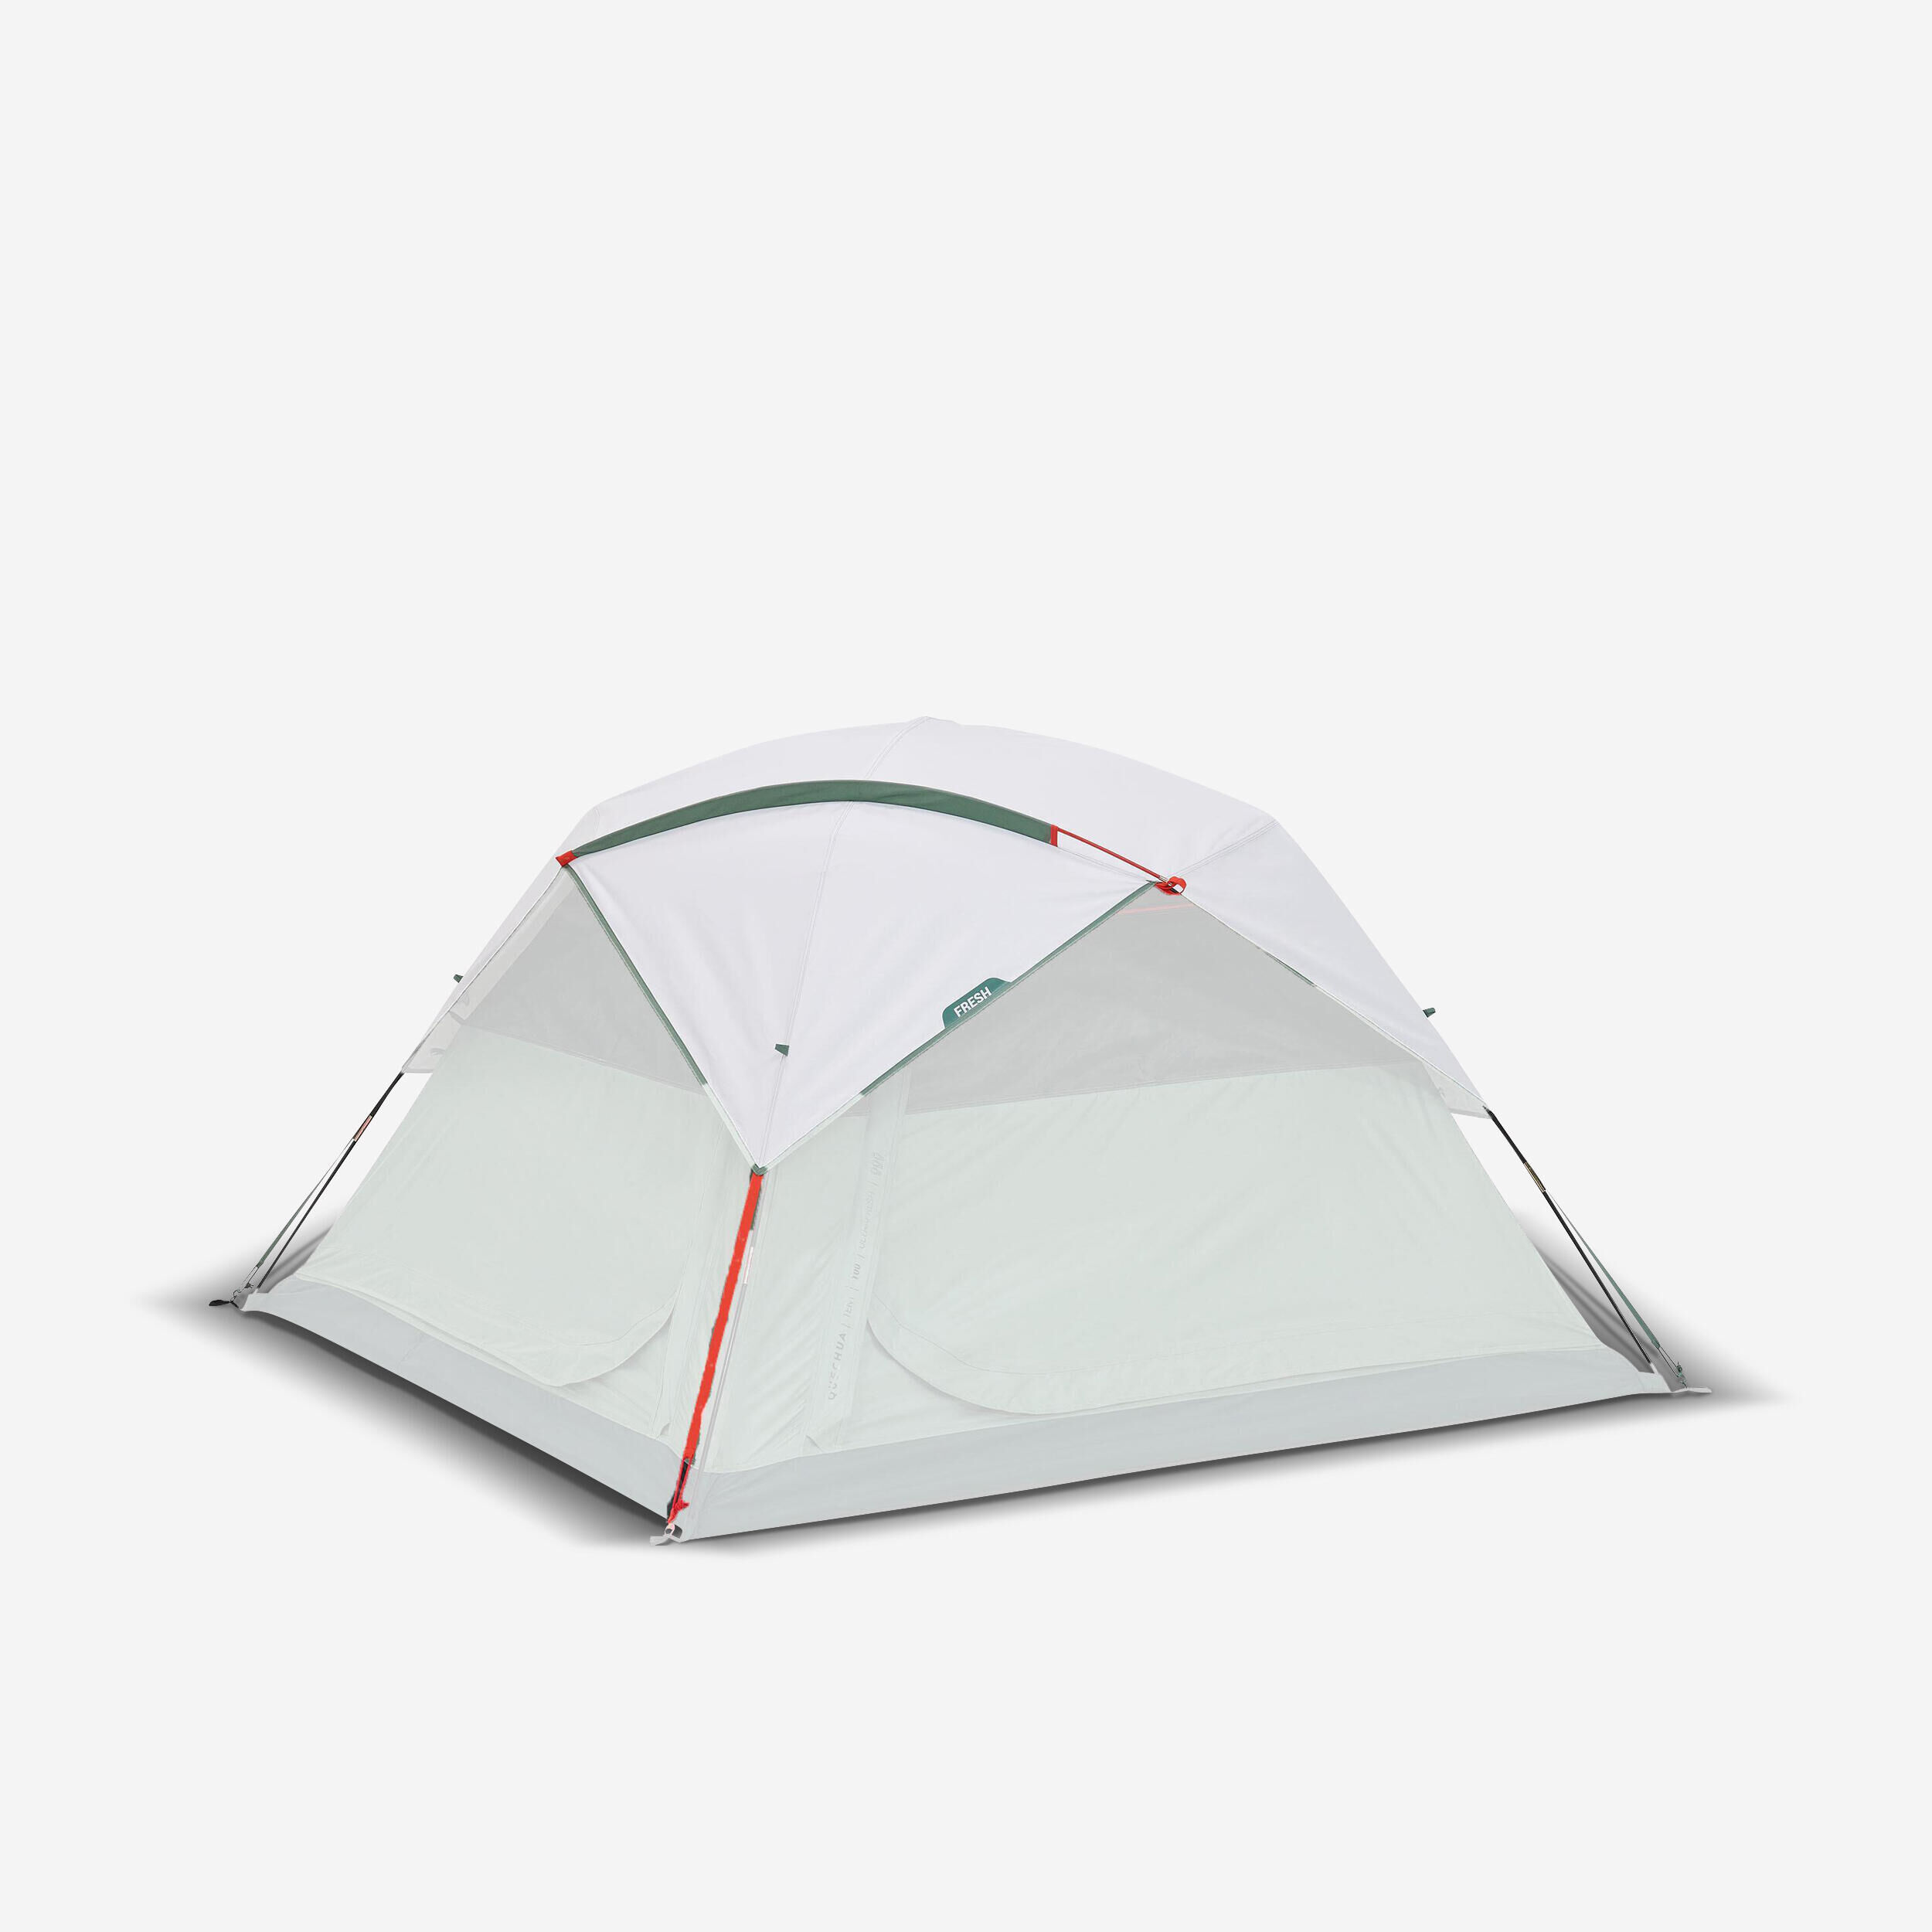 QUECHUA FLYSHEET - SPARE PART FOR THE MH100 ULTRAFRESH 3 PERSON TENT